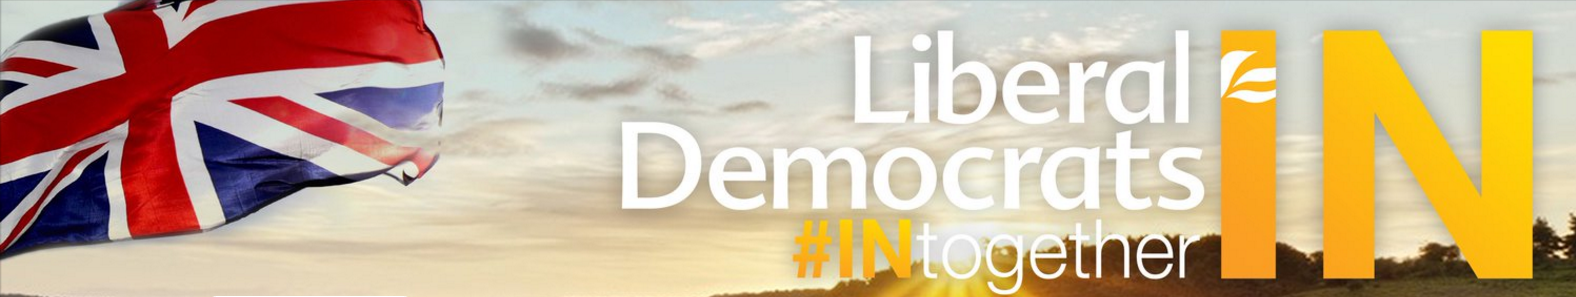 Liberal-Democrats-In-Together-European-referendum-campaign-Twitter-account